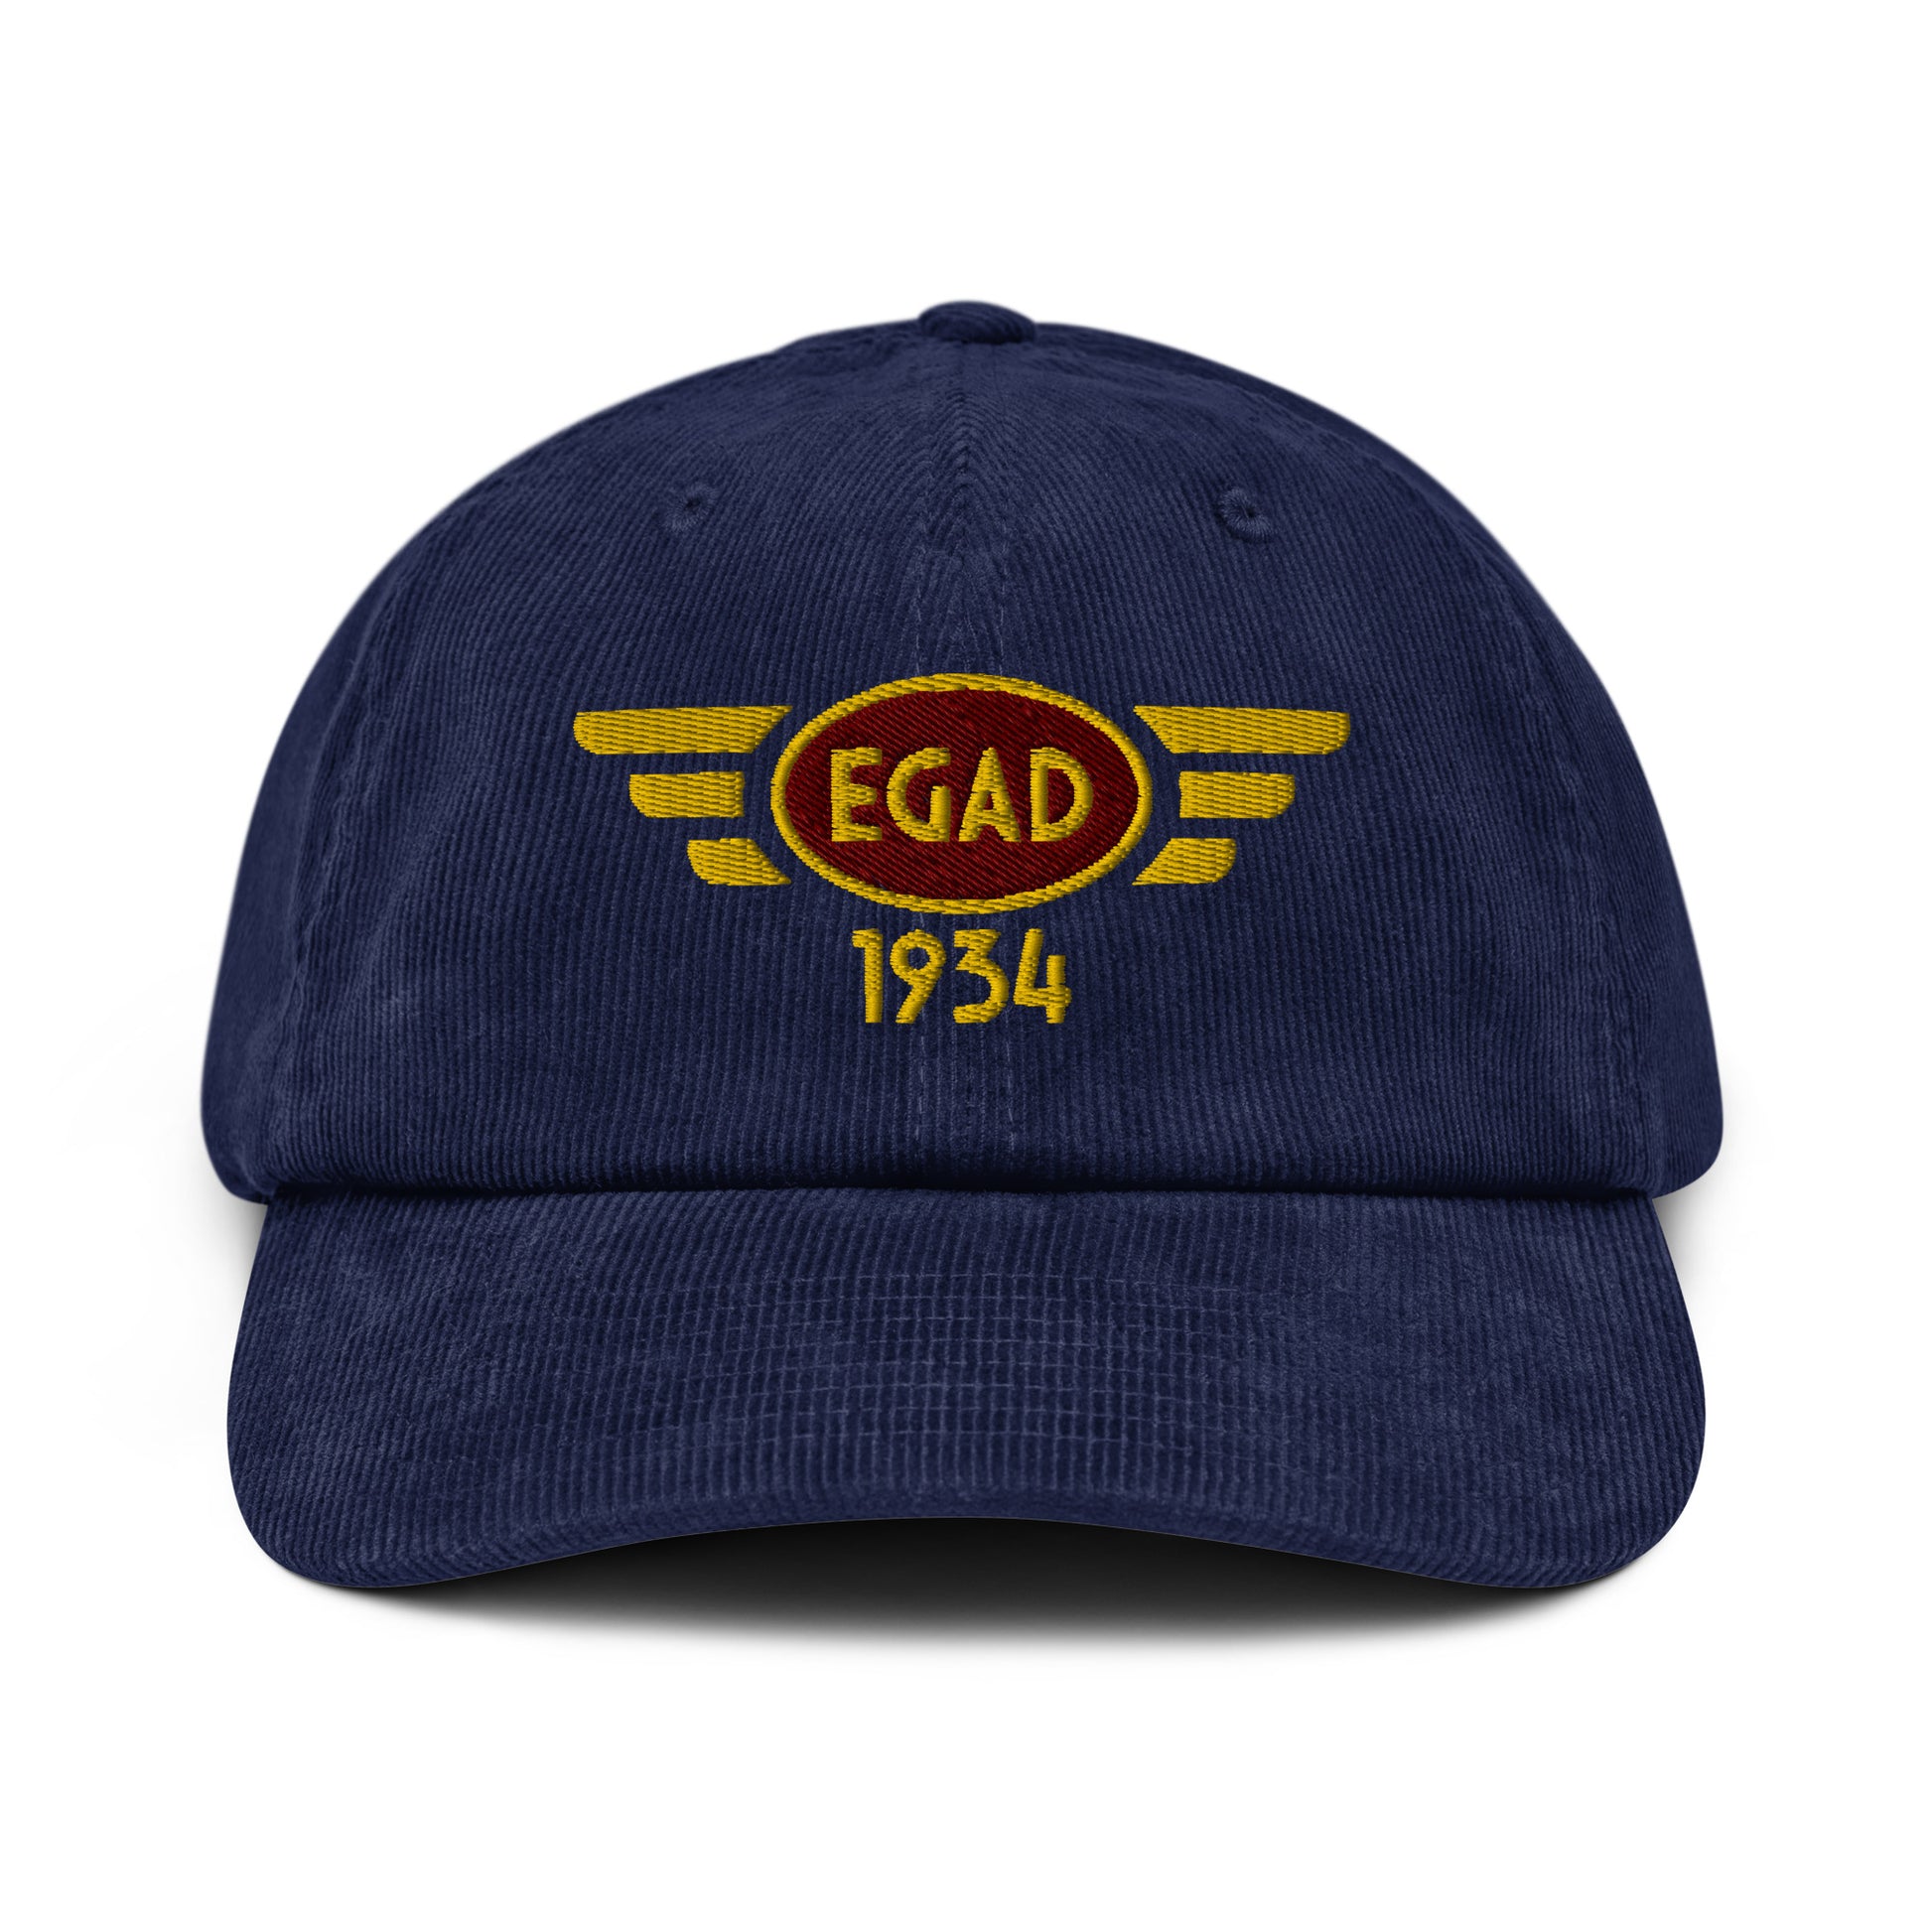 Oxford navy blue coloured corduroy baseball cap with embroidered vintage style aviation logo for Newtownards Airport.